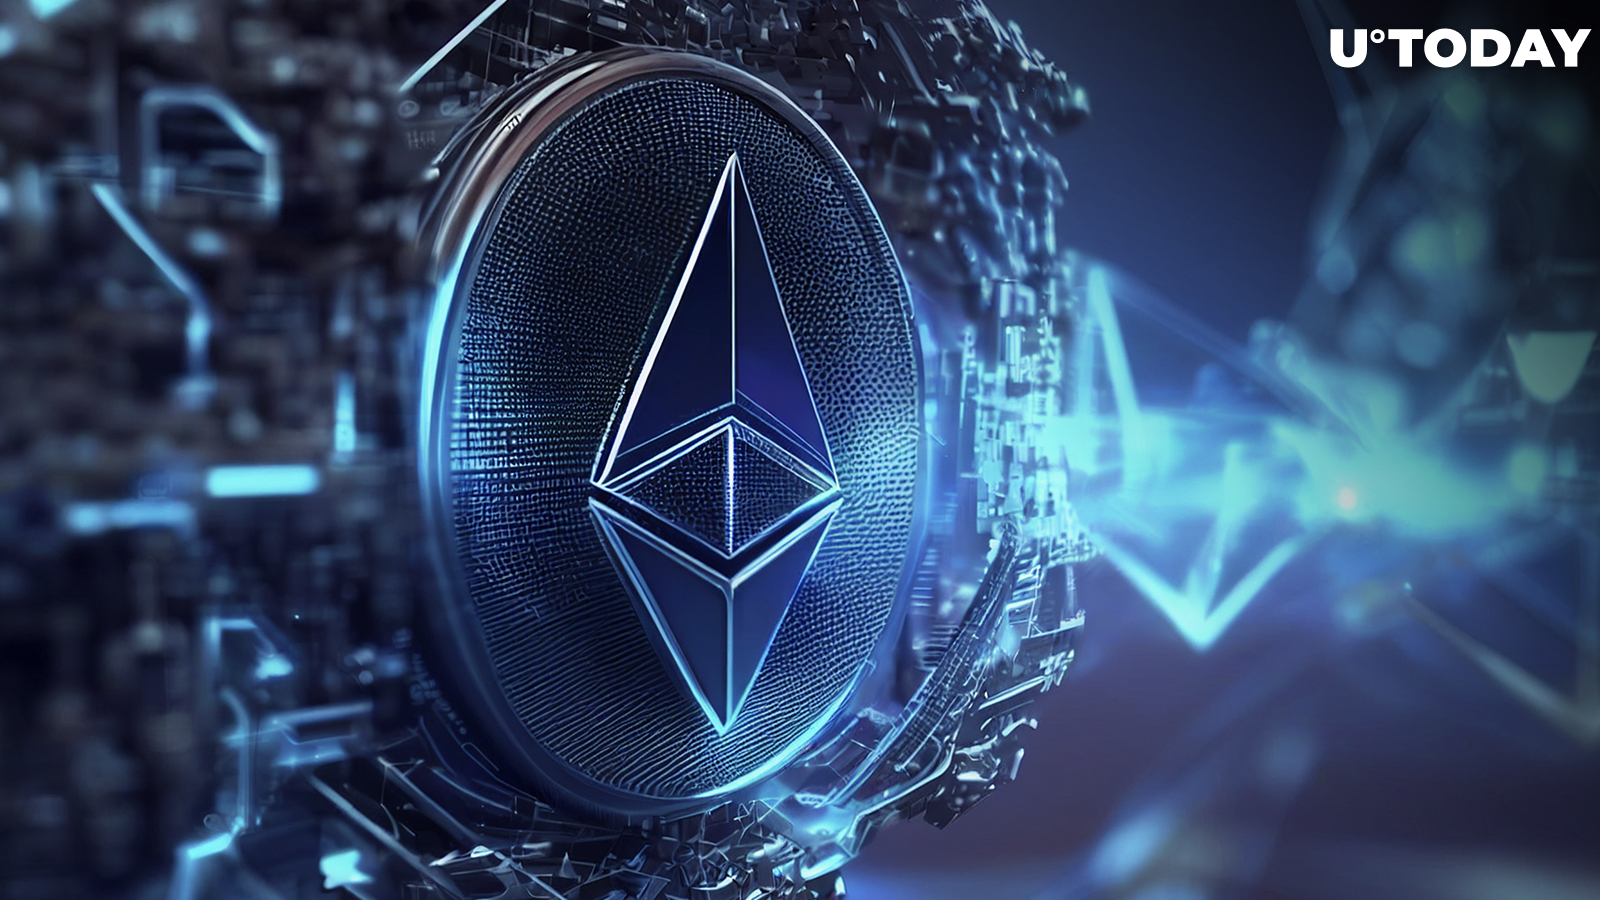 This Ethereum Network Update Is Extremely Important